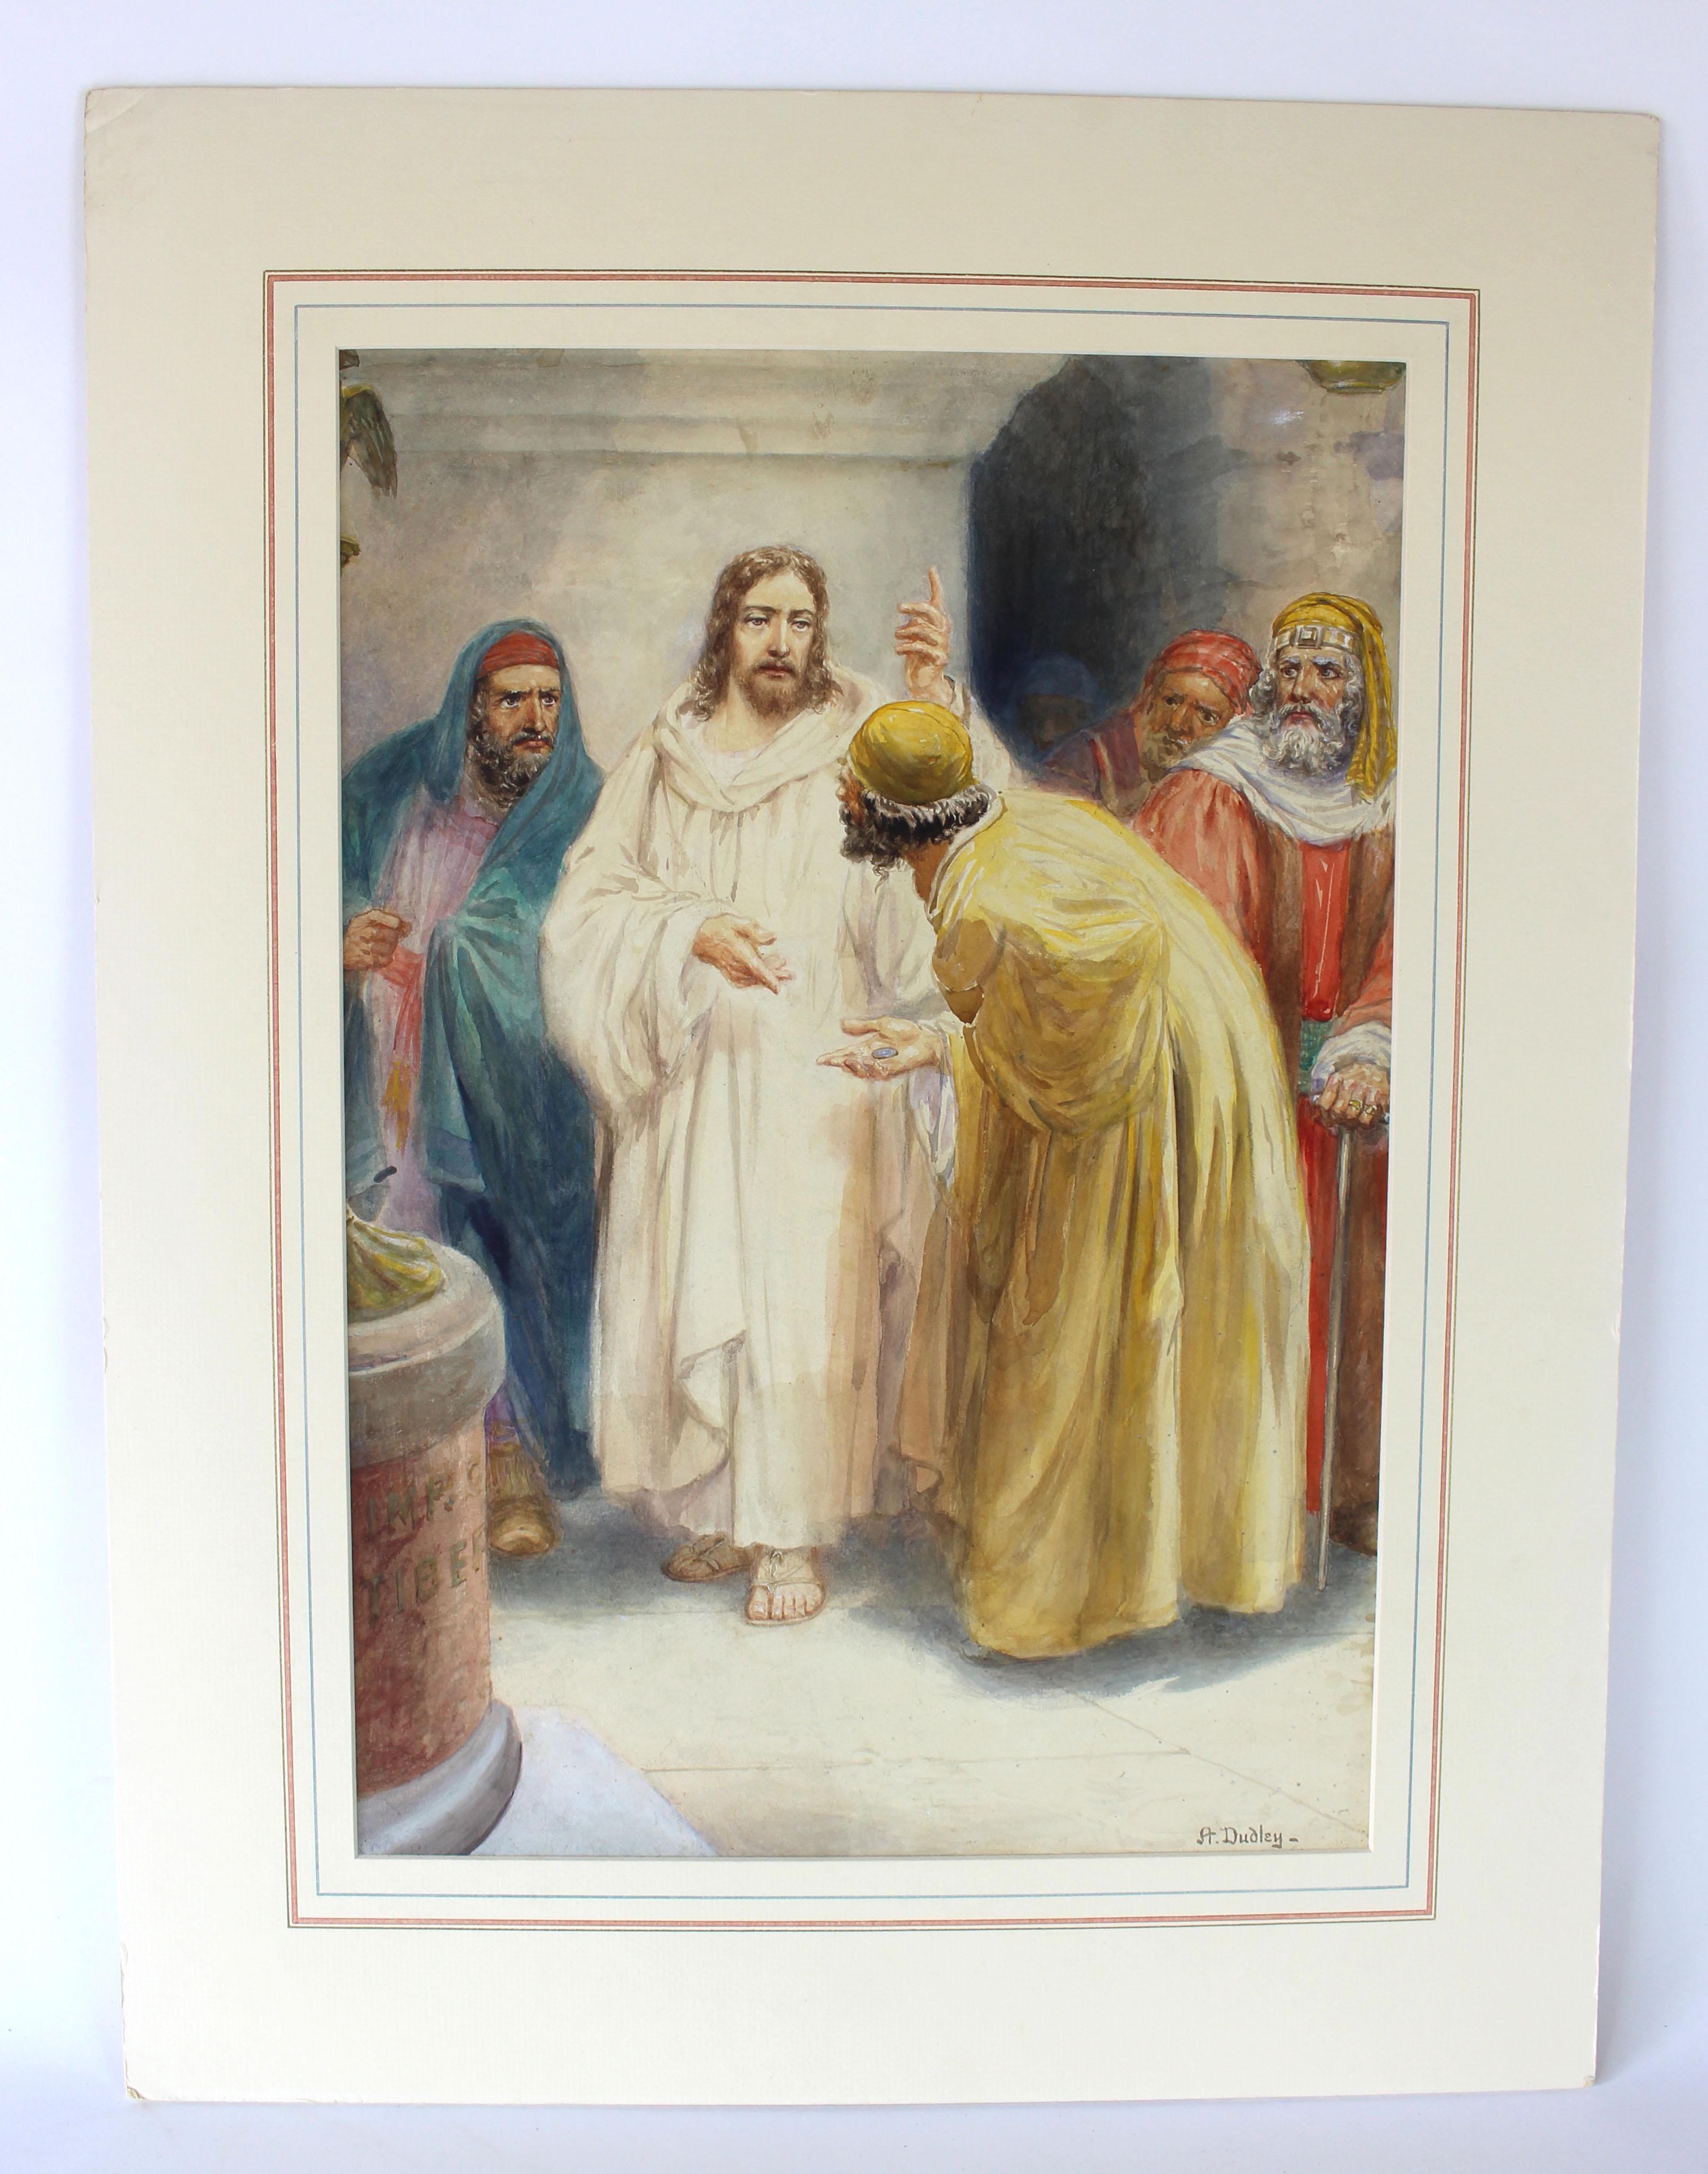 Original Watercolor Paintings by A. Dudley (Giovianni Barbaro) and Francisco J Torrome